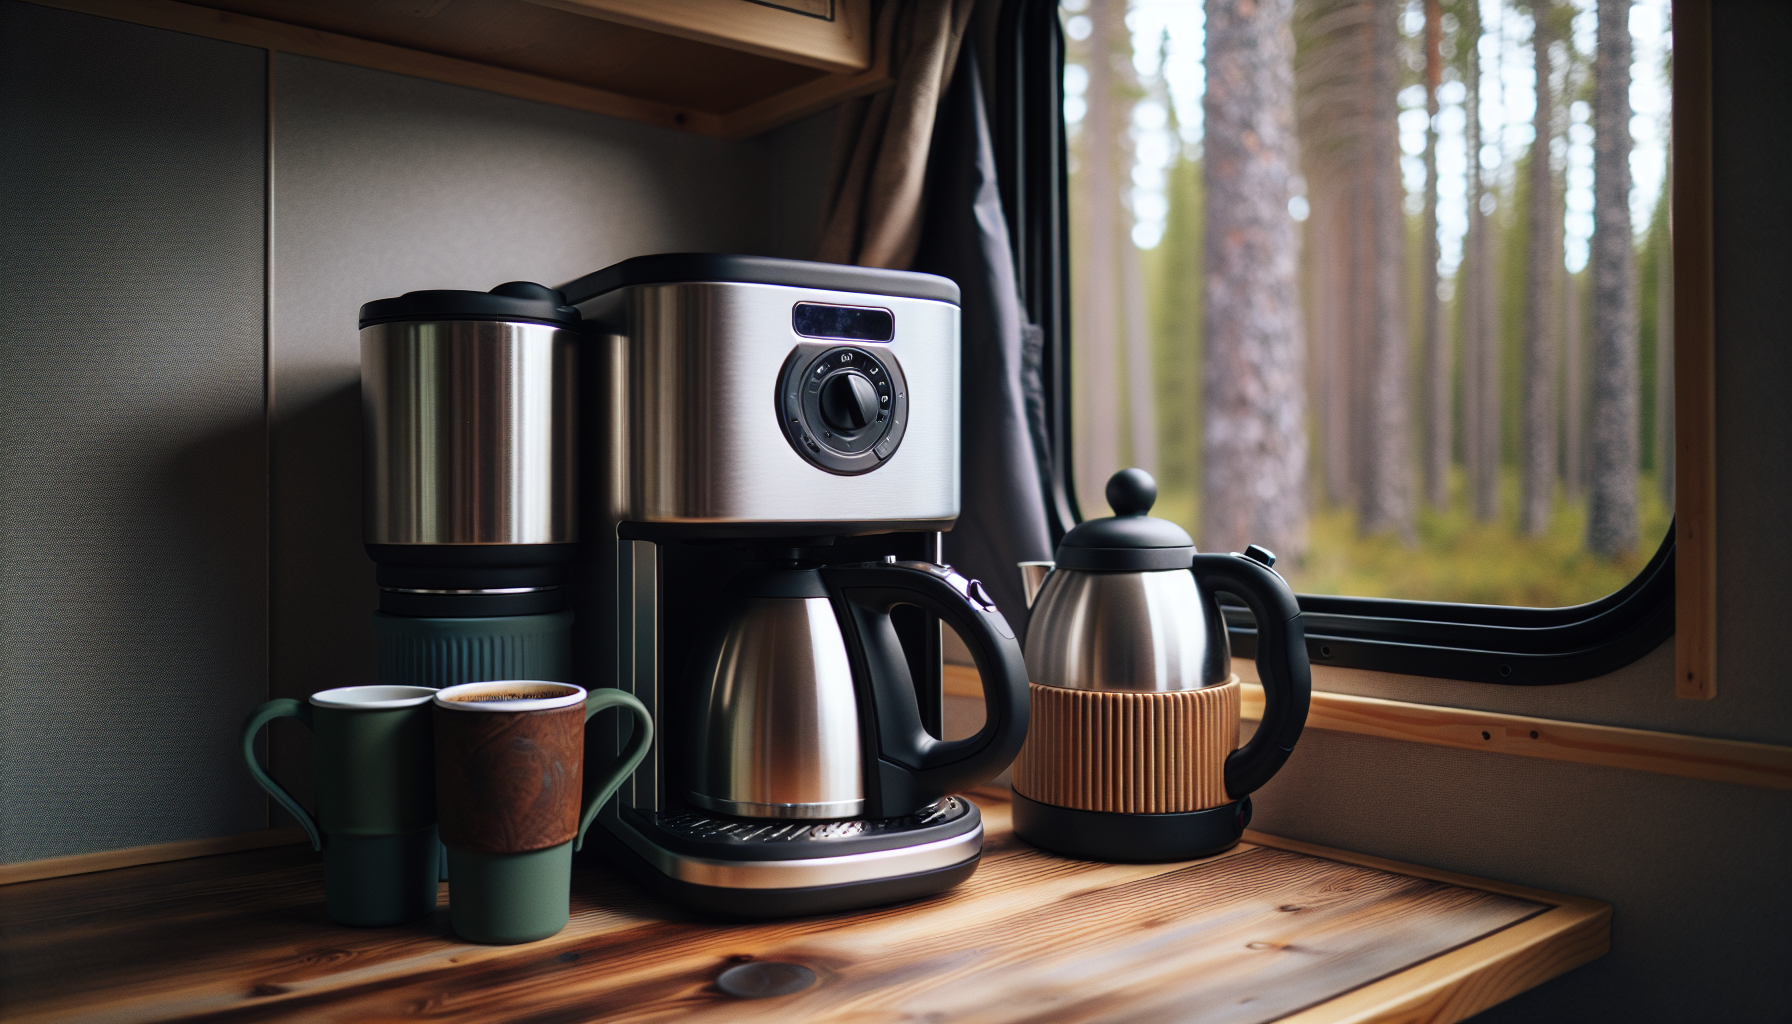 Compact coffee maker and insulated mugs